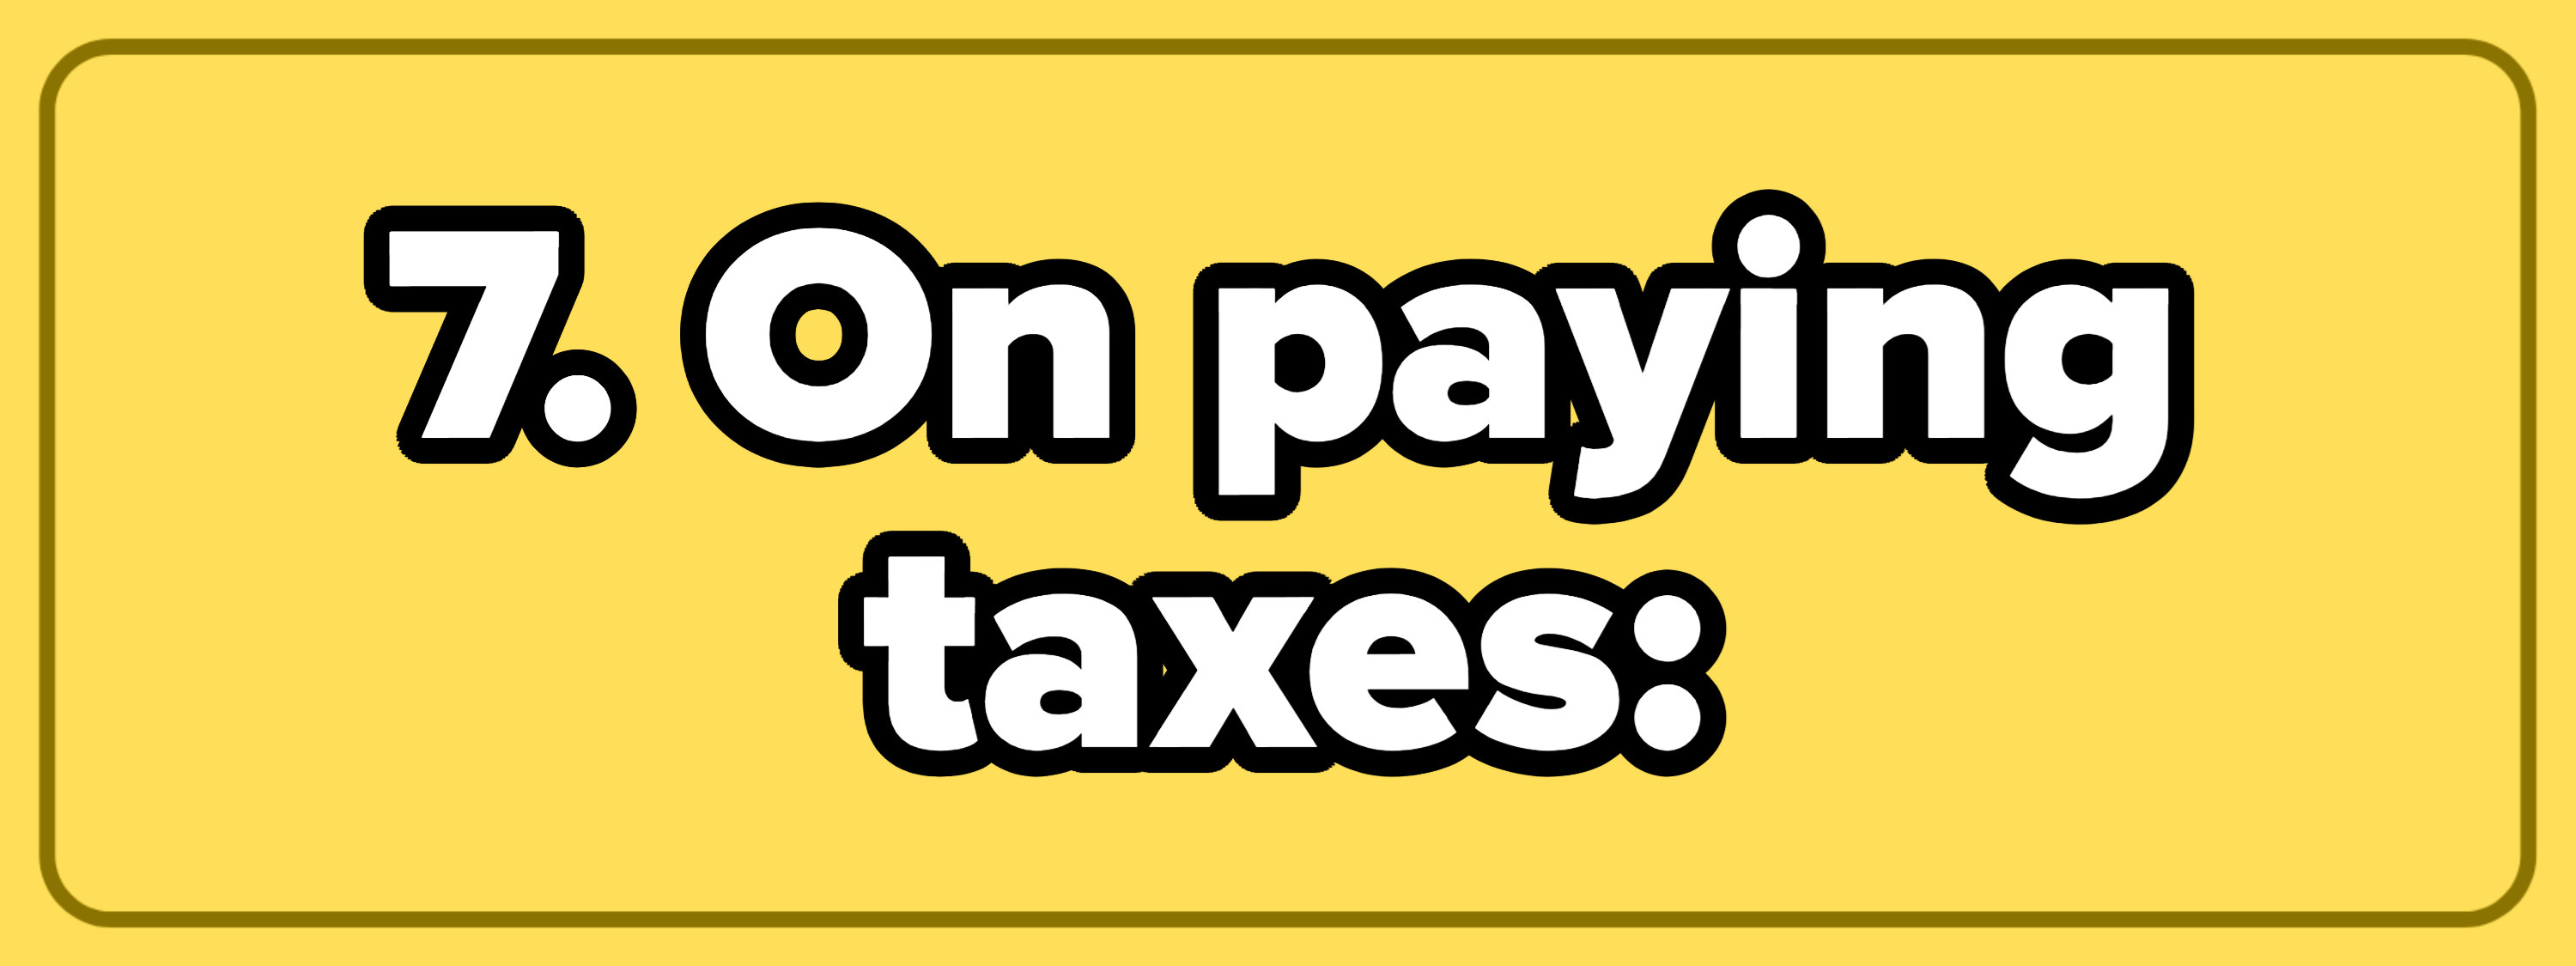 7. On paying taxes: